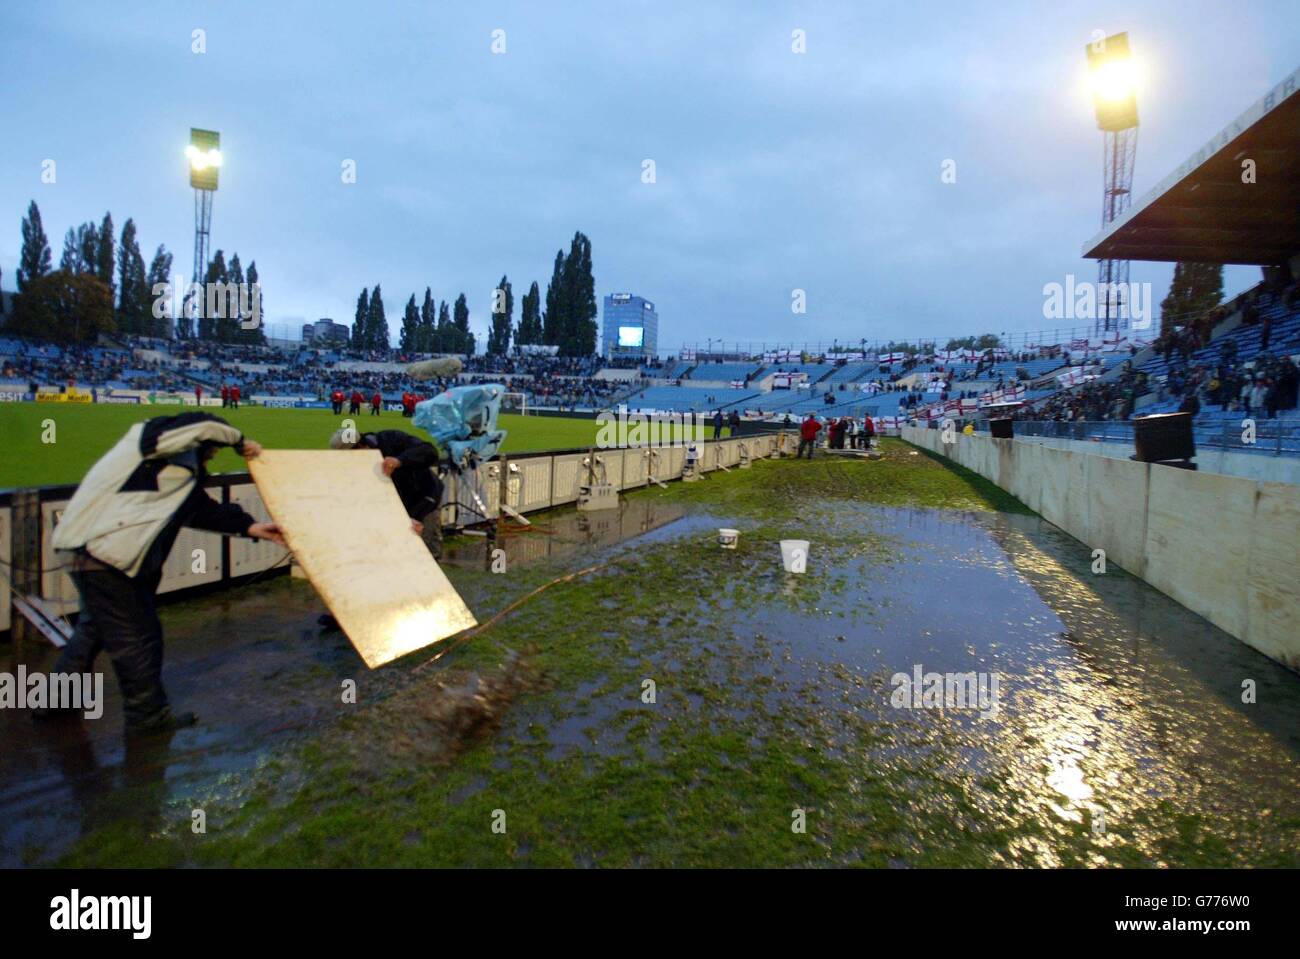 Different methods are used to try and drain the pitch at the Tehele Pole Stadium in Bratislava in Slovakia ahead of England's Euro 2004 qualifier against Slovakia . The game will go ahead despite heavy downpours having initially put the match in doubt. Stock Photo